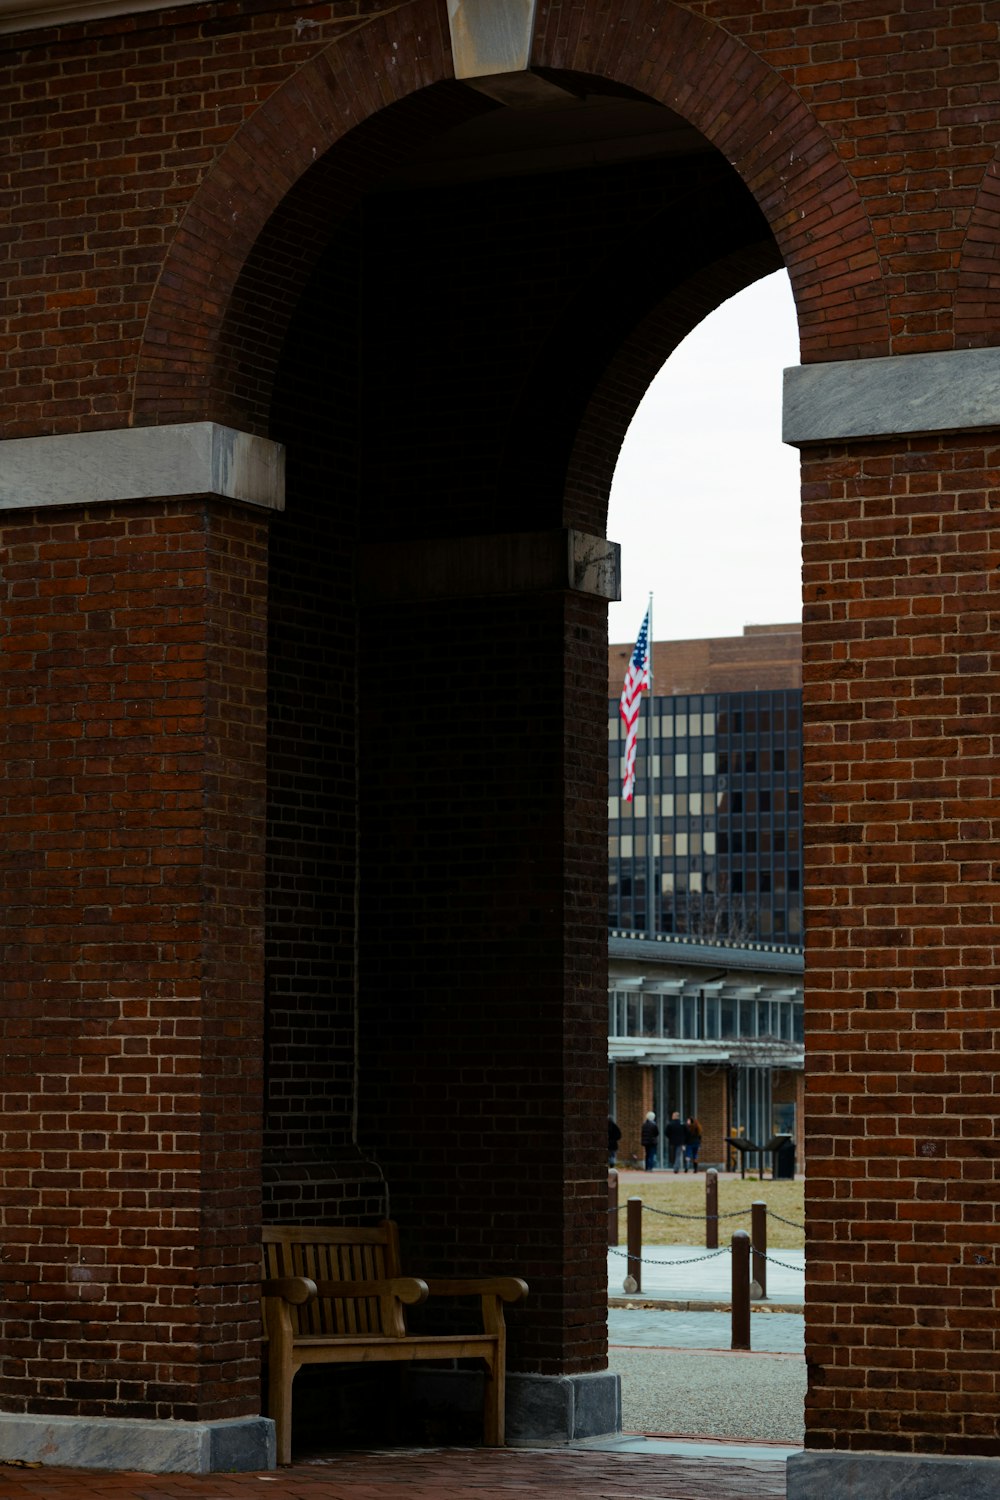 a bench sitting under an arch in a brick building